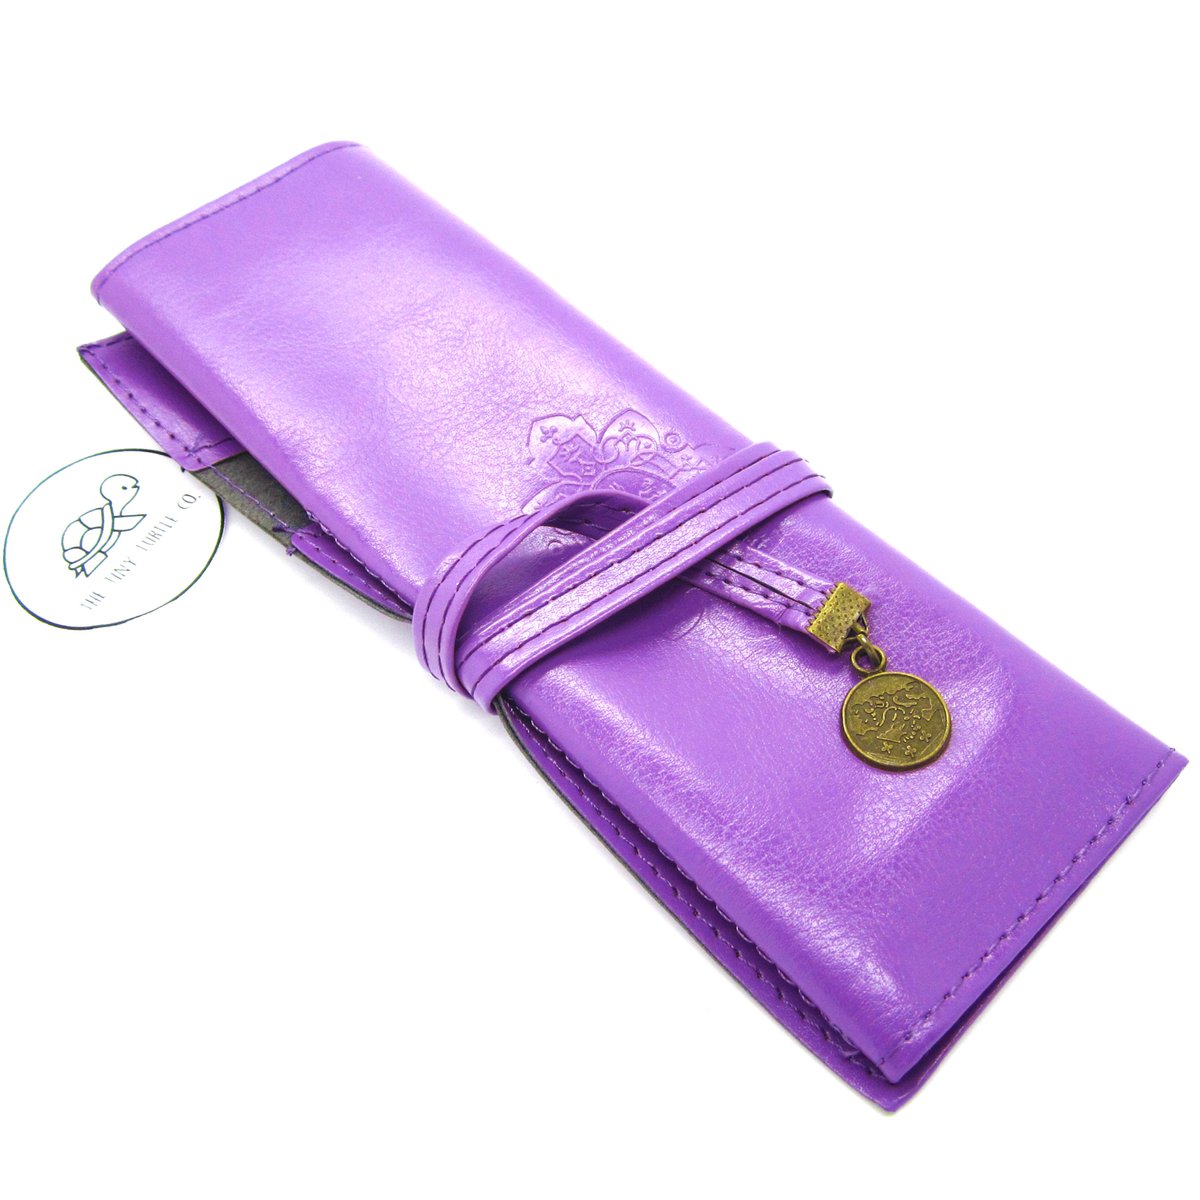 A classy way to wrap your pens and pencils in style: Oriental Pencil and Pen Wrap - Faux Leather embossed design etsy.me/3ehfP0g #pencilcase #designerpencilcase #canvaspencilcase #cutepencilcase #trendypencilcase #kawaiipencilcase #funpencilcase #giftpencilca